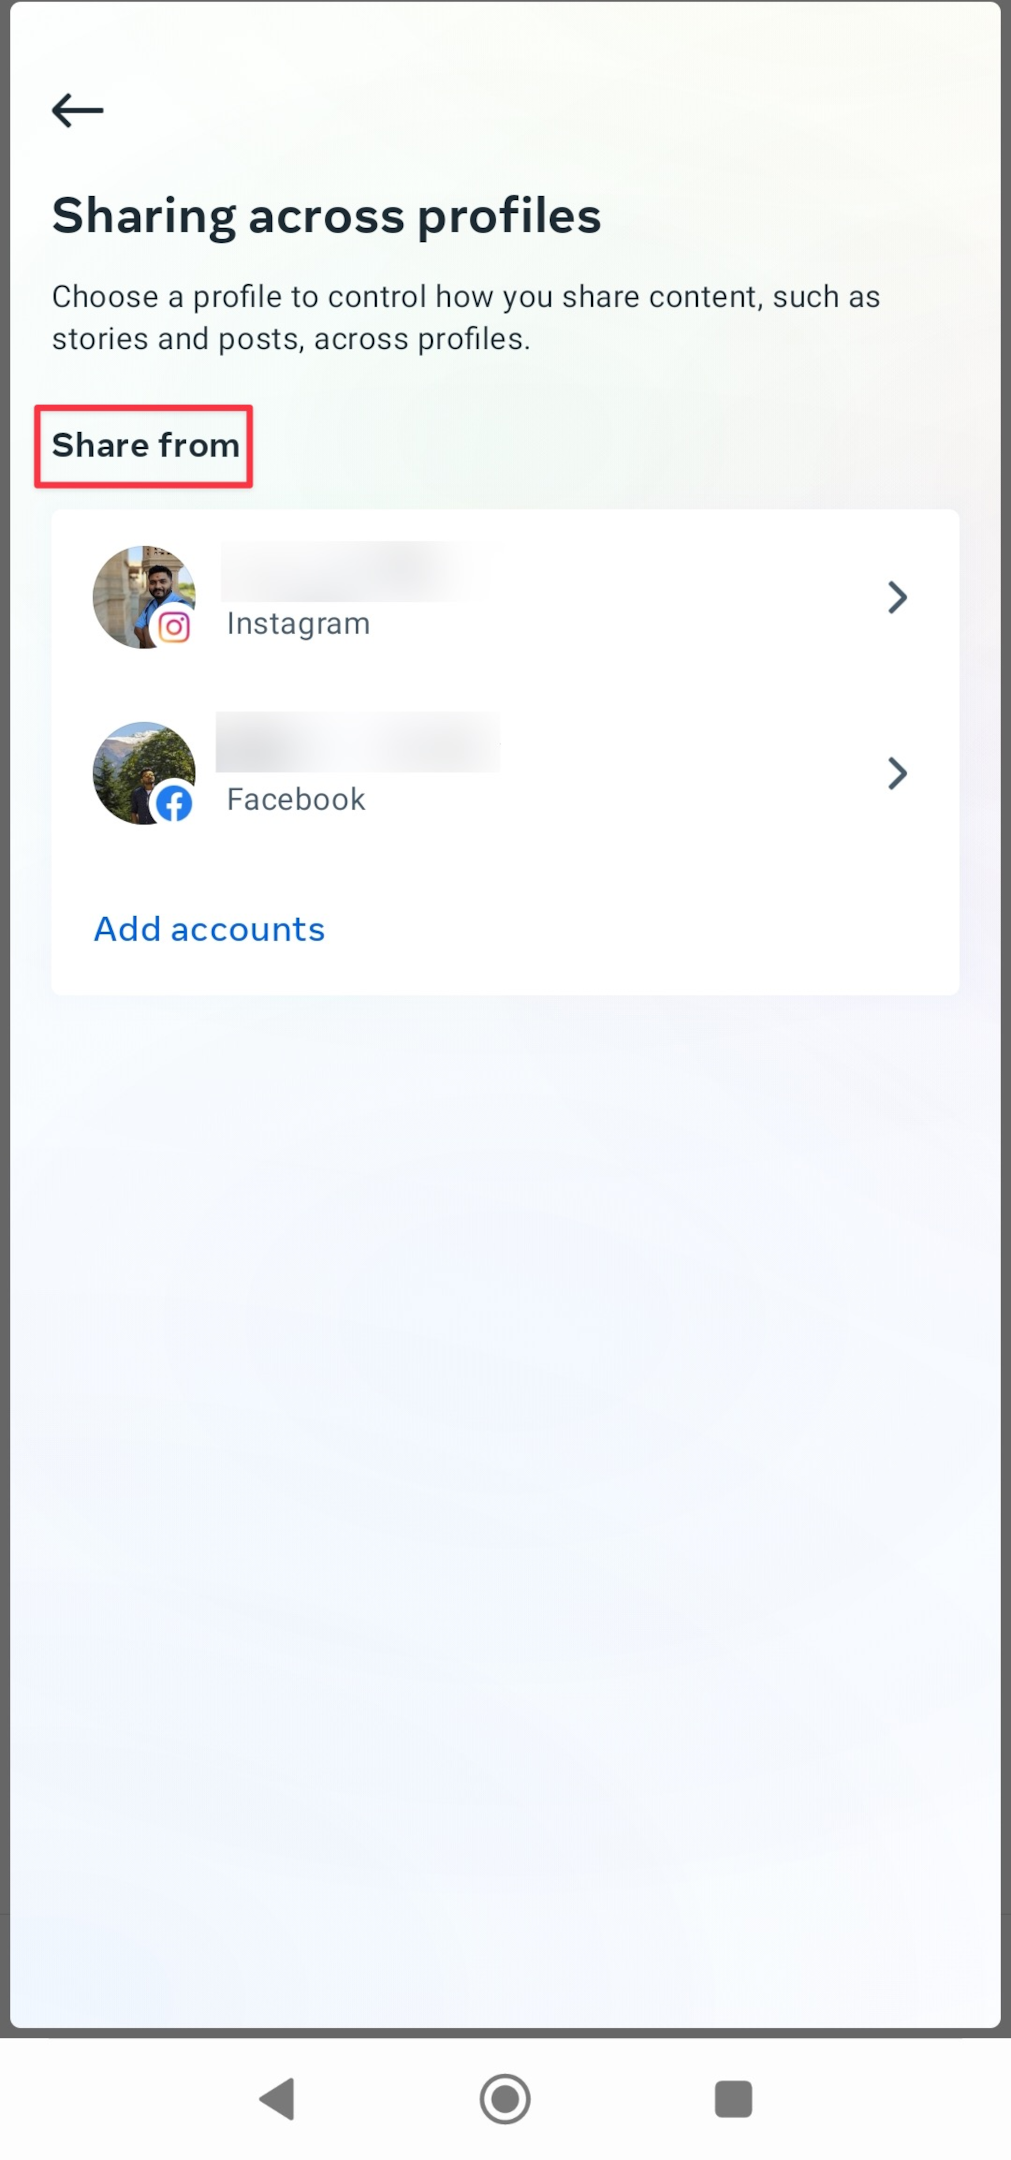 Remote.tools shows how to configure Instagram sharing setting for Facebook